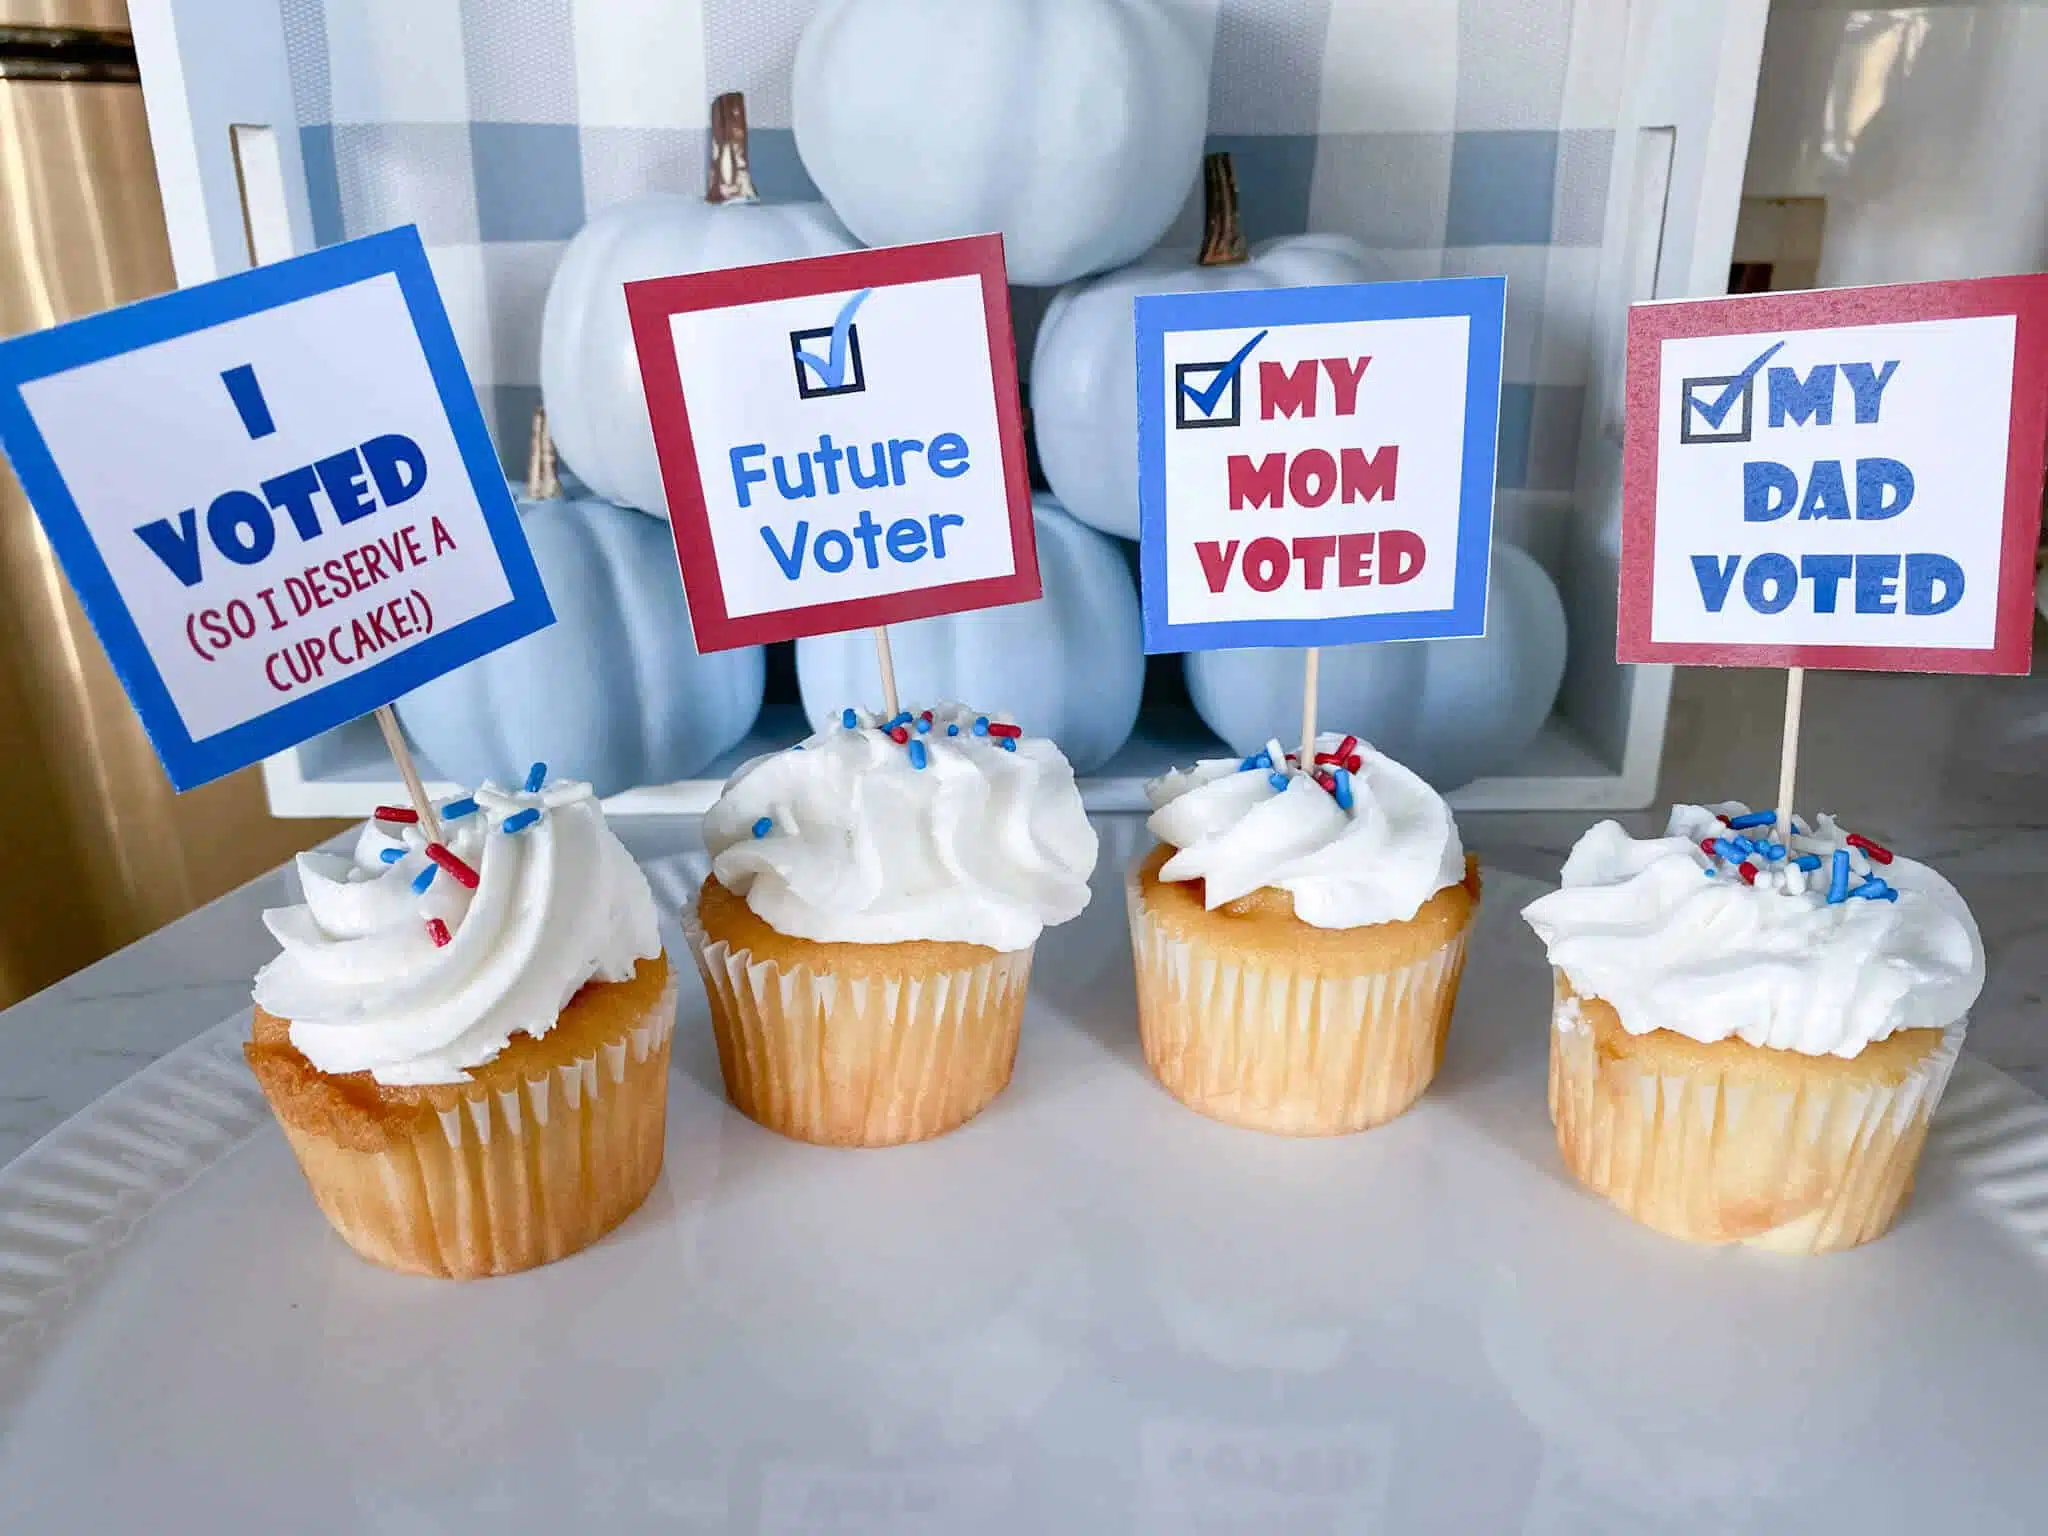 4 vanilla cupcakes with white frosting and red/white/blue sprinkles with square cupcake toppers on toothpicks: I Voted (so I deserve a cupcake), Future Voter, My Mom Voted, My Dad Voted, on white platter in front of blue ombre pumpkins